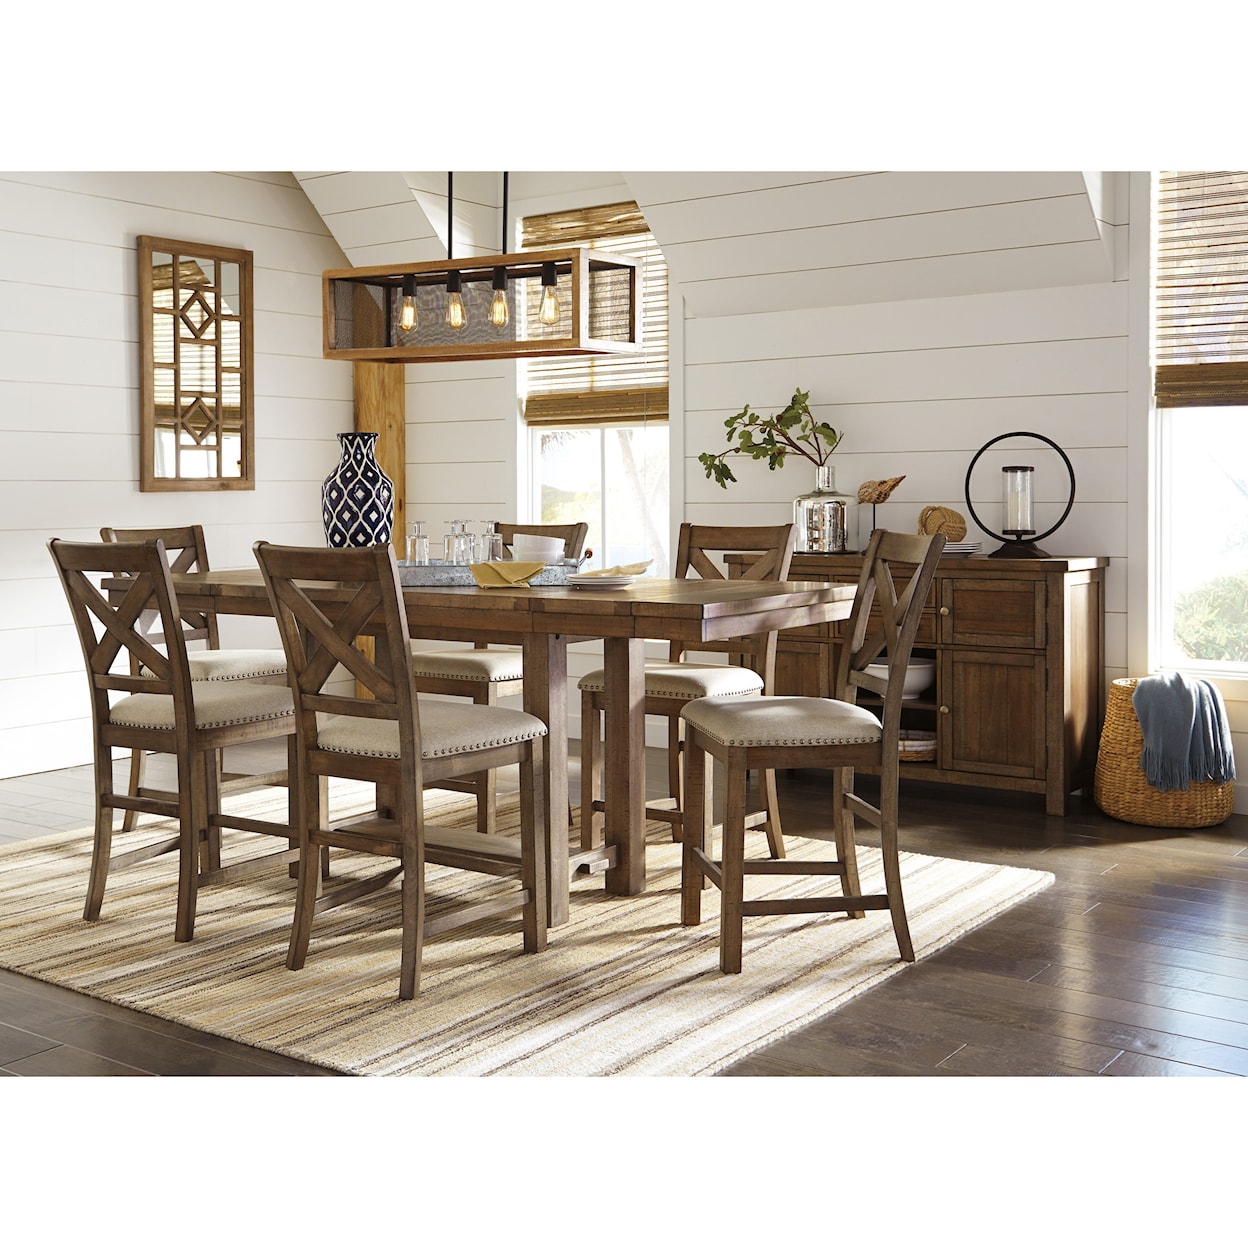 Signature Design by Ashley Furniture Moriville Dining Room Group